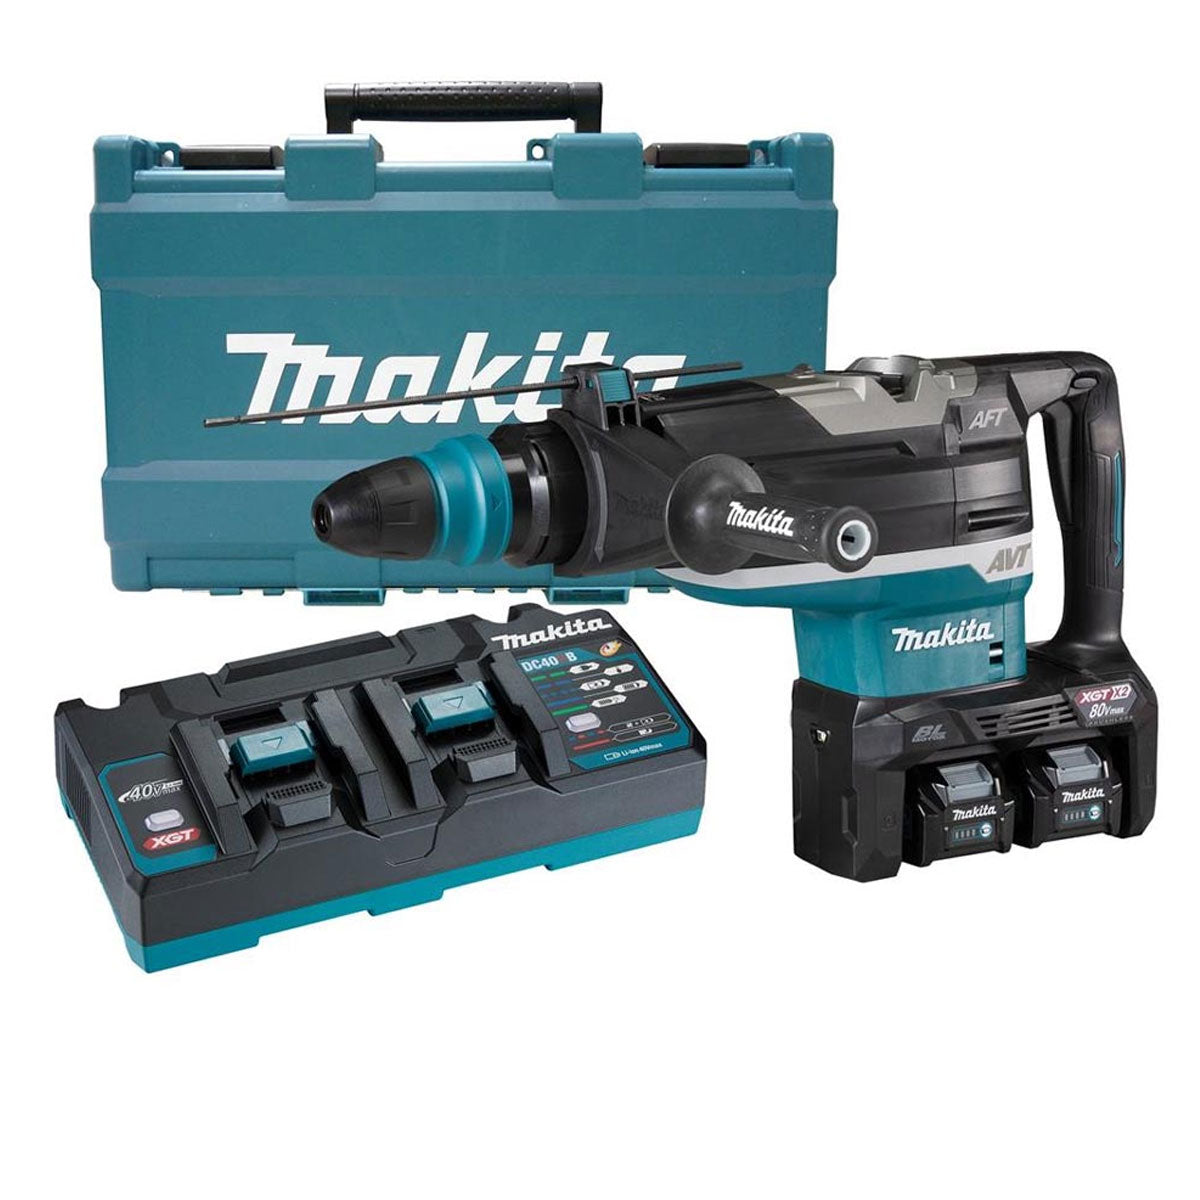 Makita HR006GD203 80V/40V XGT Brushless Demolition Hammer Drill With 2 x 2.5Ah Battery, Charger & Case